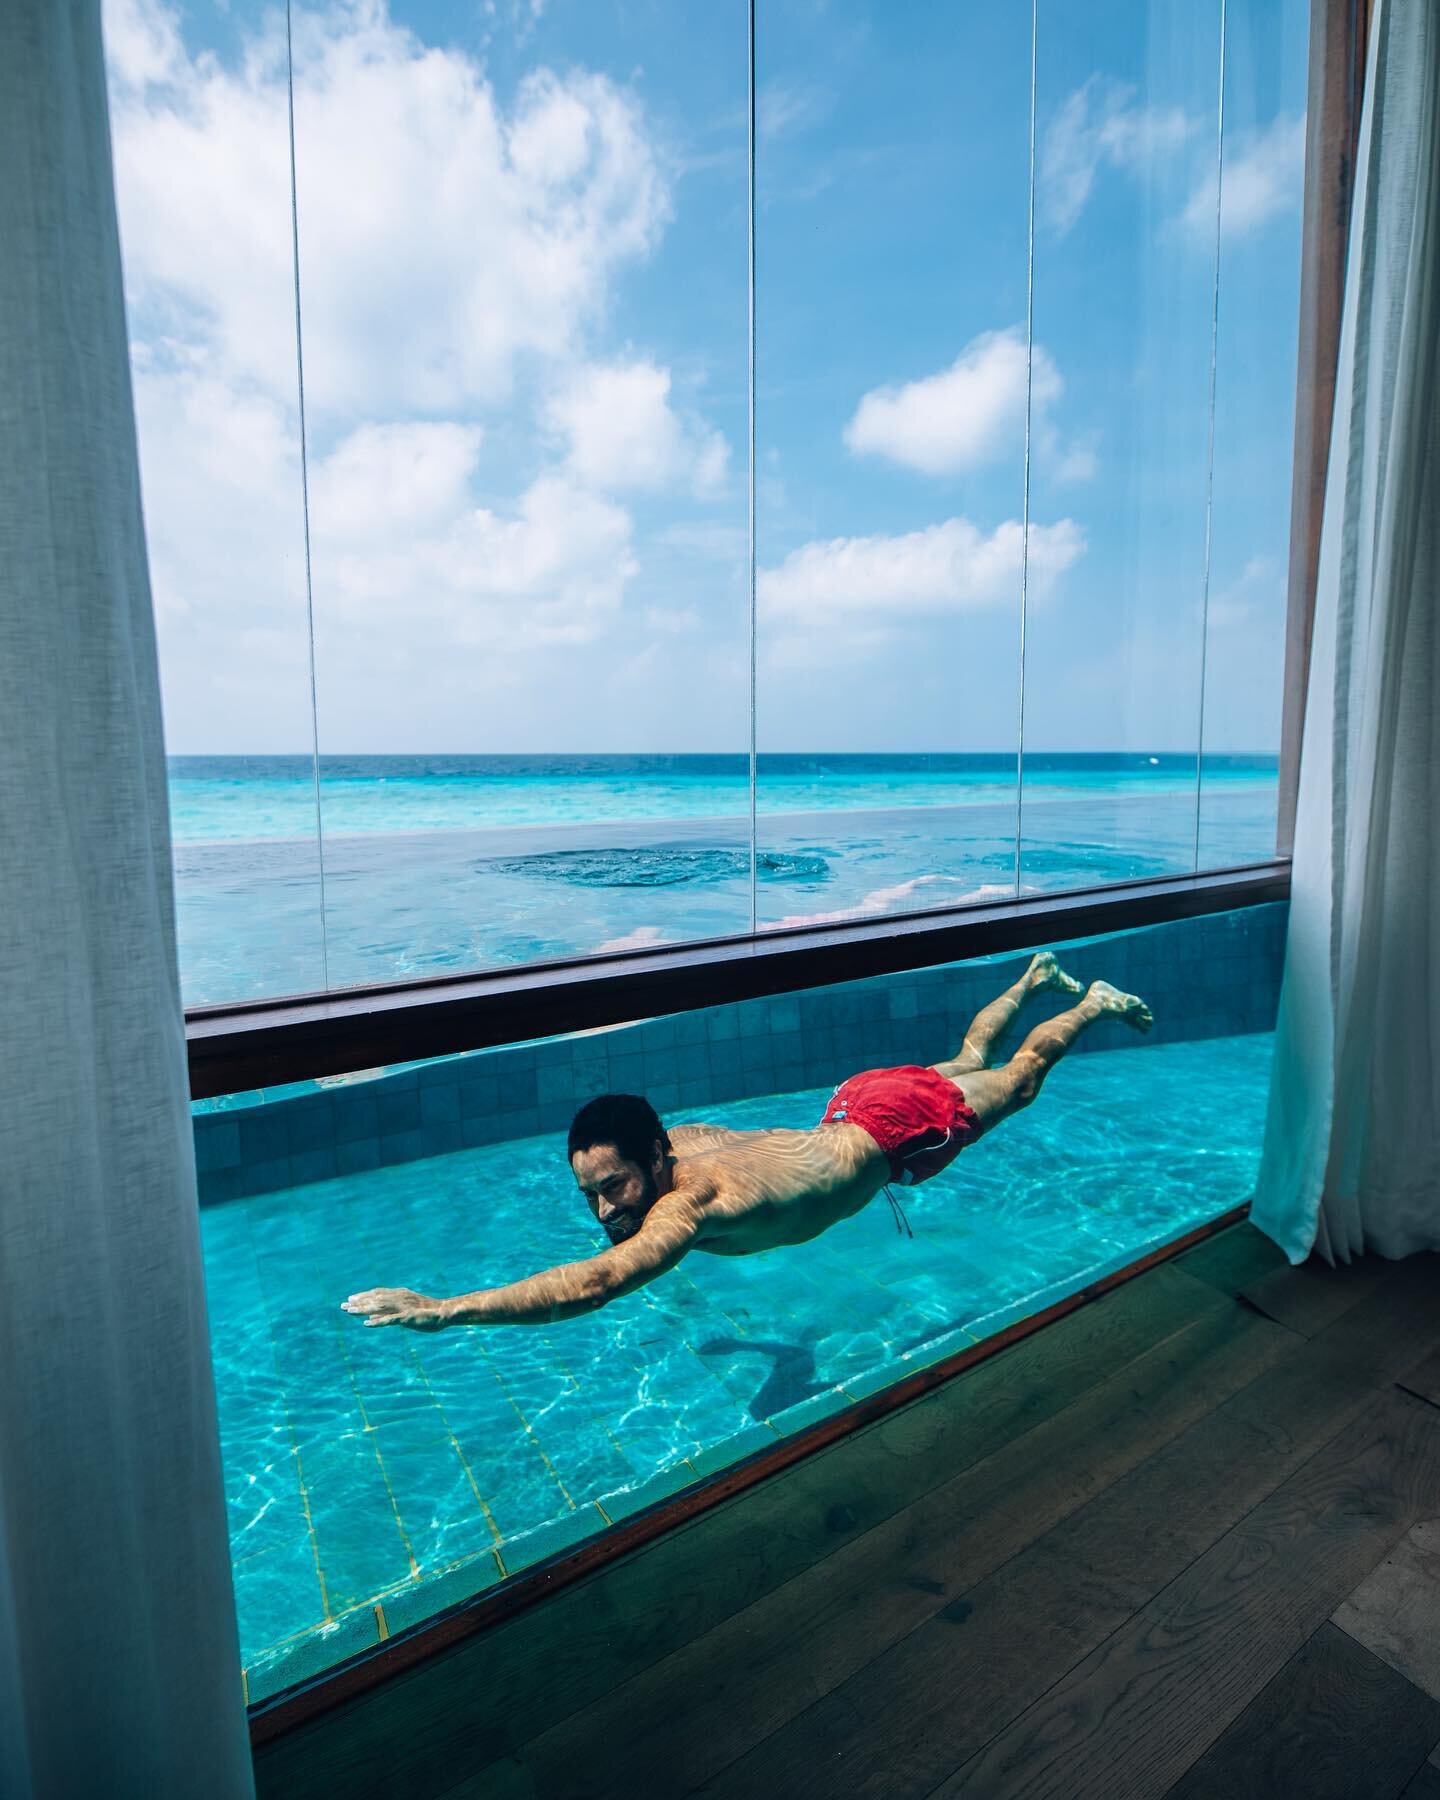 This huge villa in the Maldives features a &ldquo;private beach&rdquo;, its own restaurant, and a gym with this view into the infinity pool! [swipe for more]

💧Did you know that I&rsquo;ve stayed in over 20 of the best luxury resorts in the Maldives